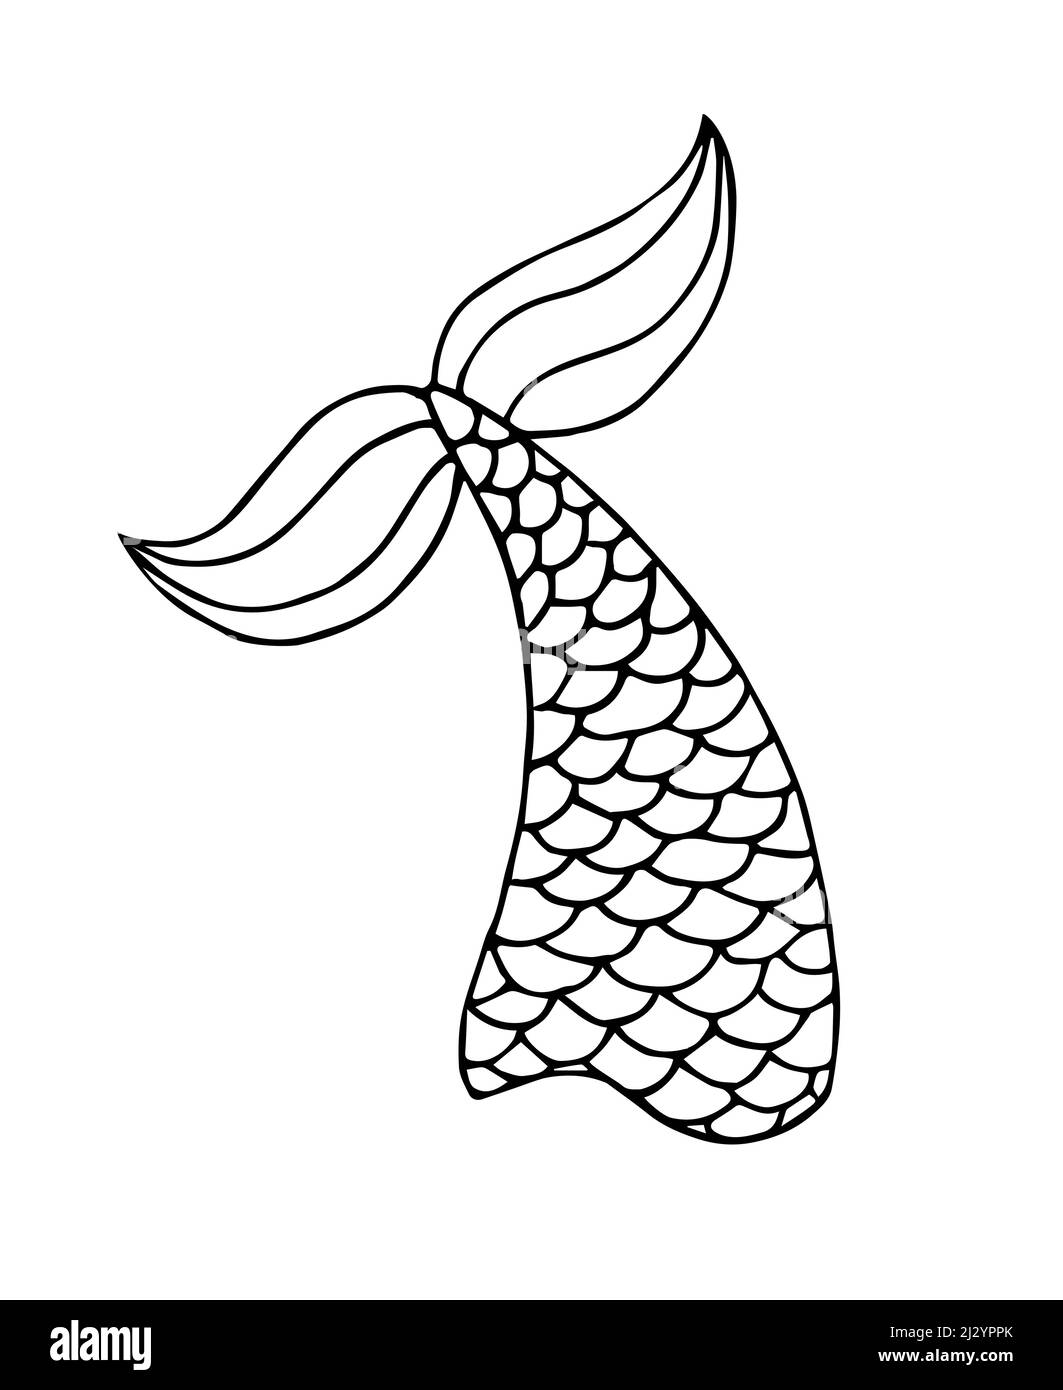 Vector hand drawn doodle sketch mermaid tail isolated on white background Stock Vector